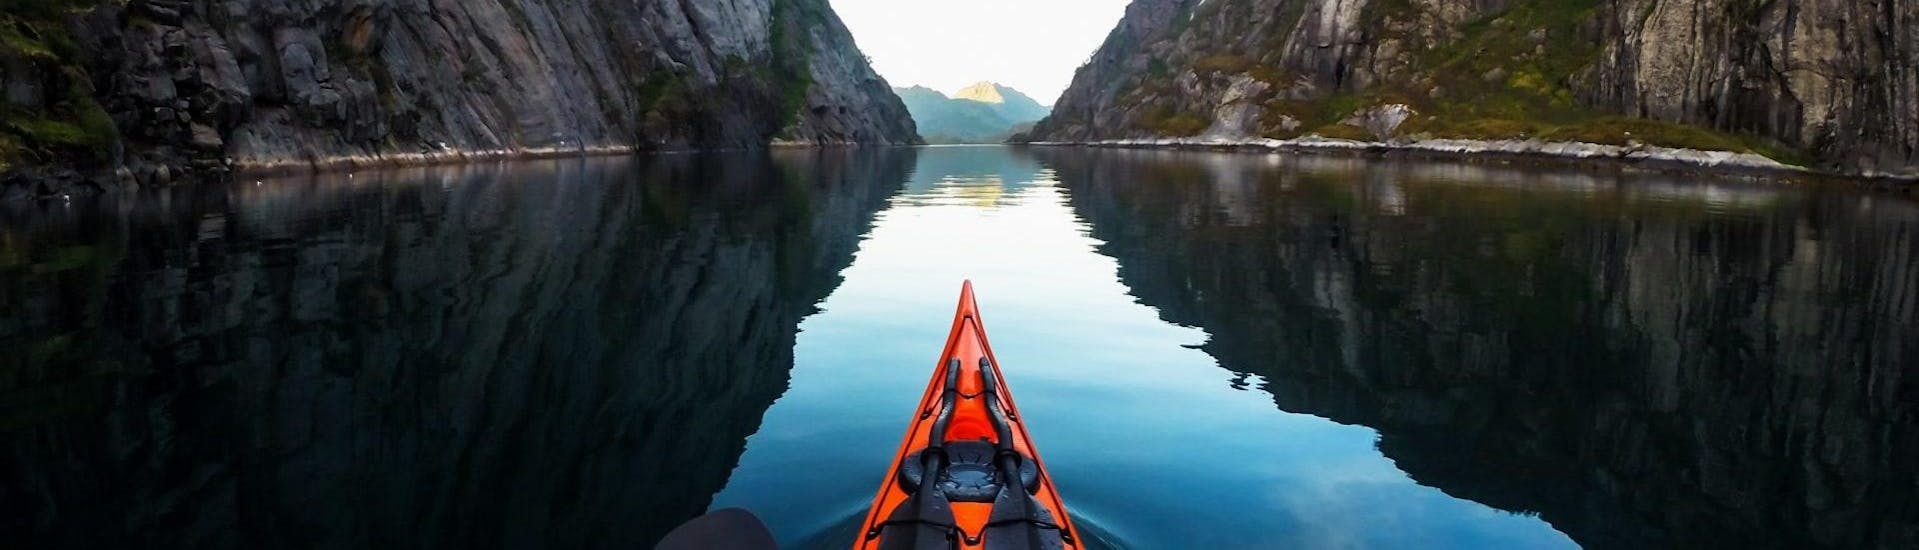 Paddling through the crystal-clear water during Kayak Tour "Explore" in Lofoten with a guide from Northern Explorers.